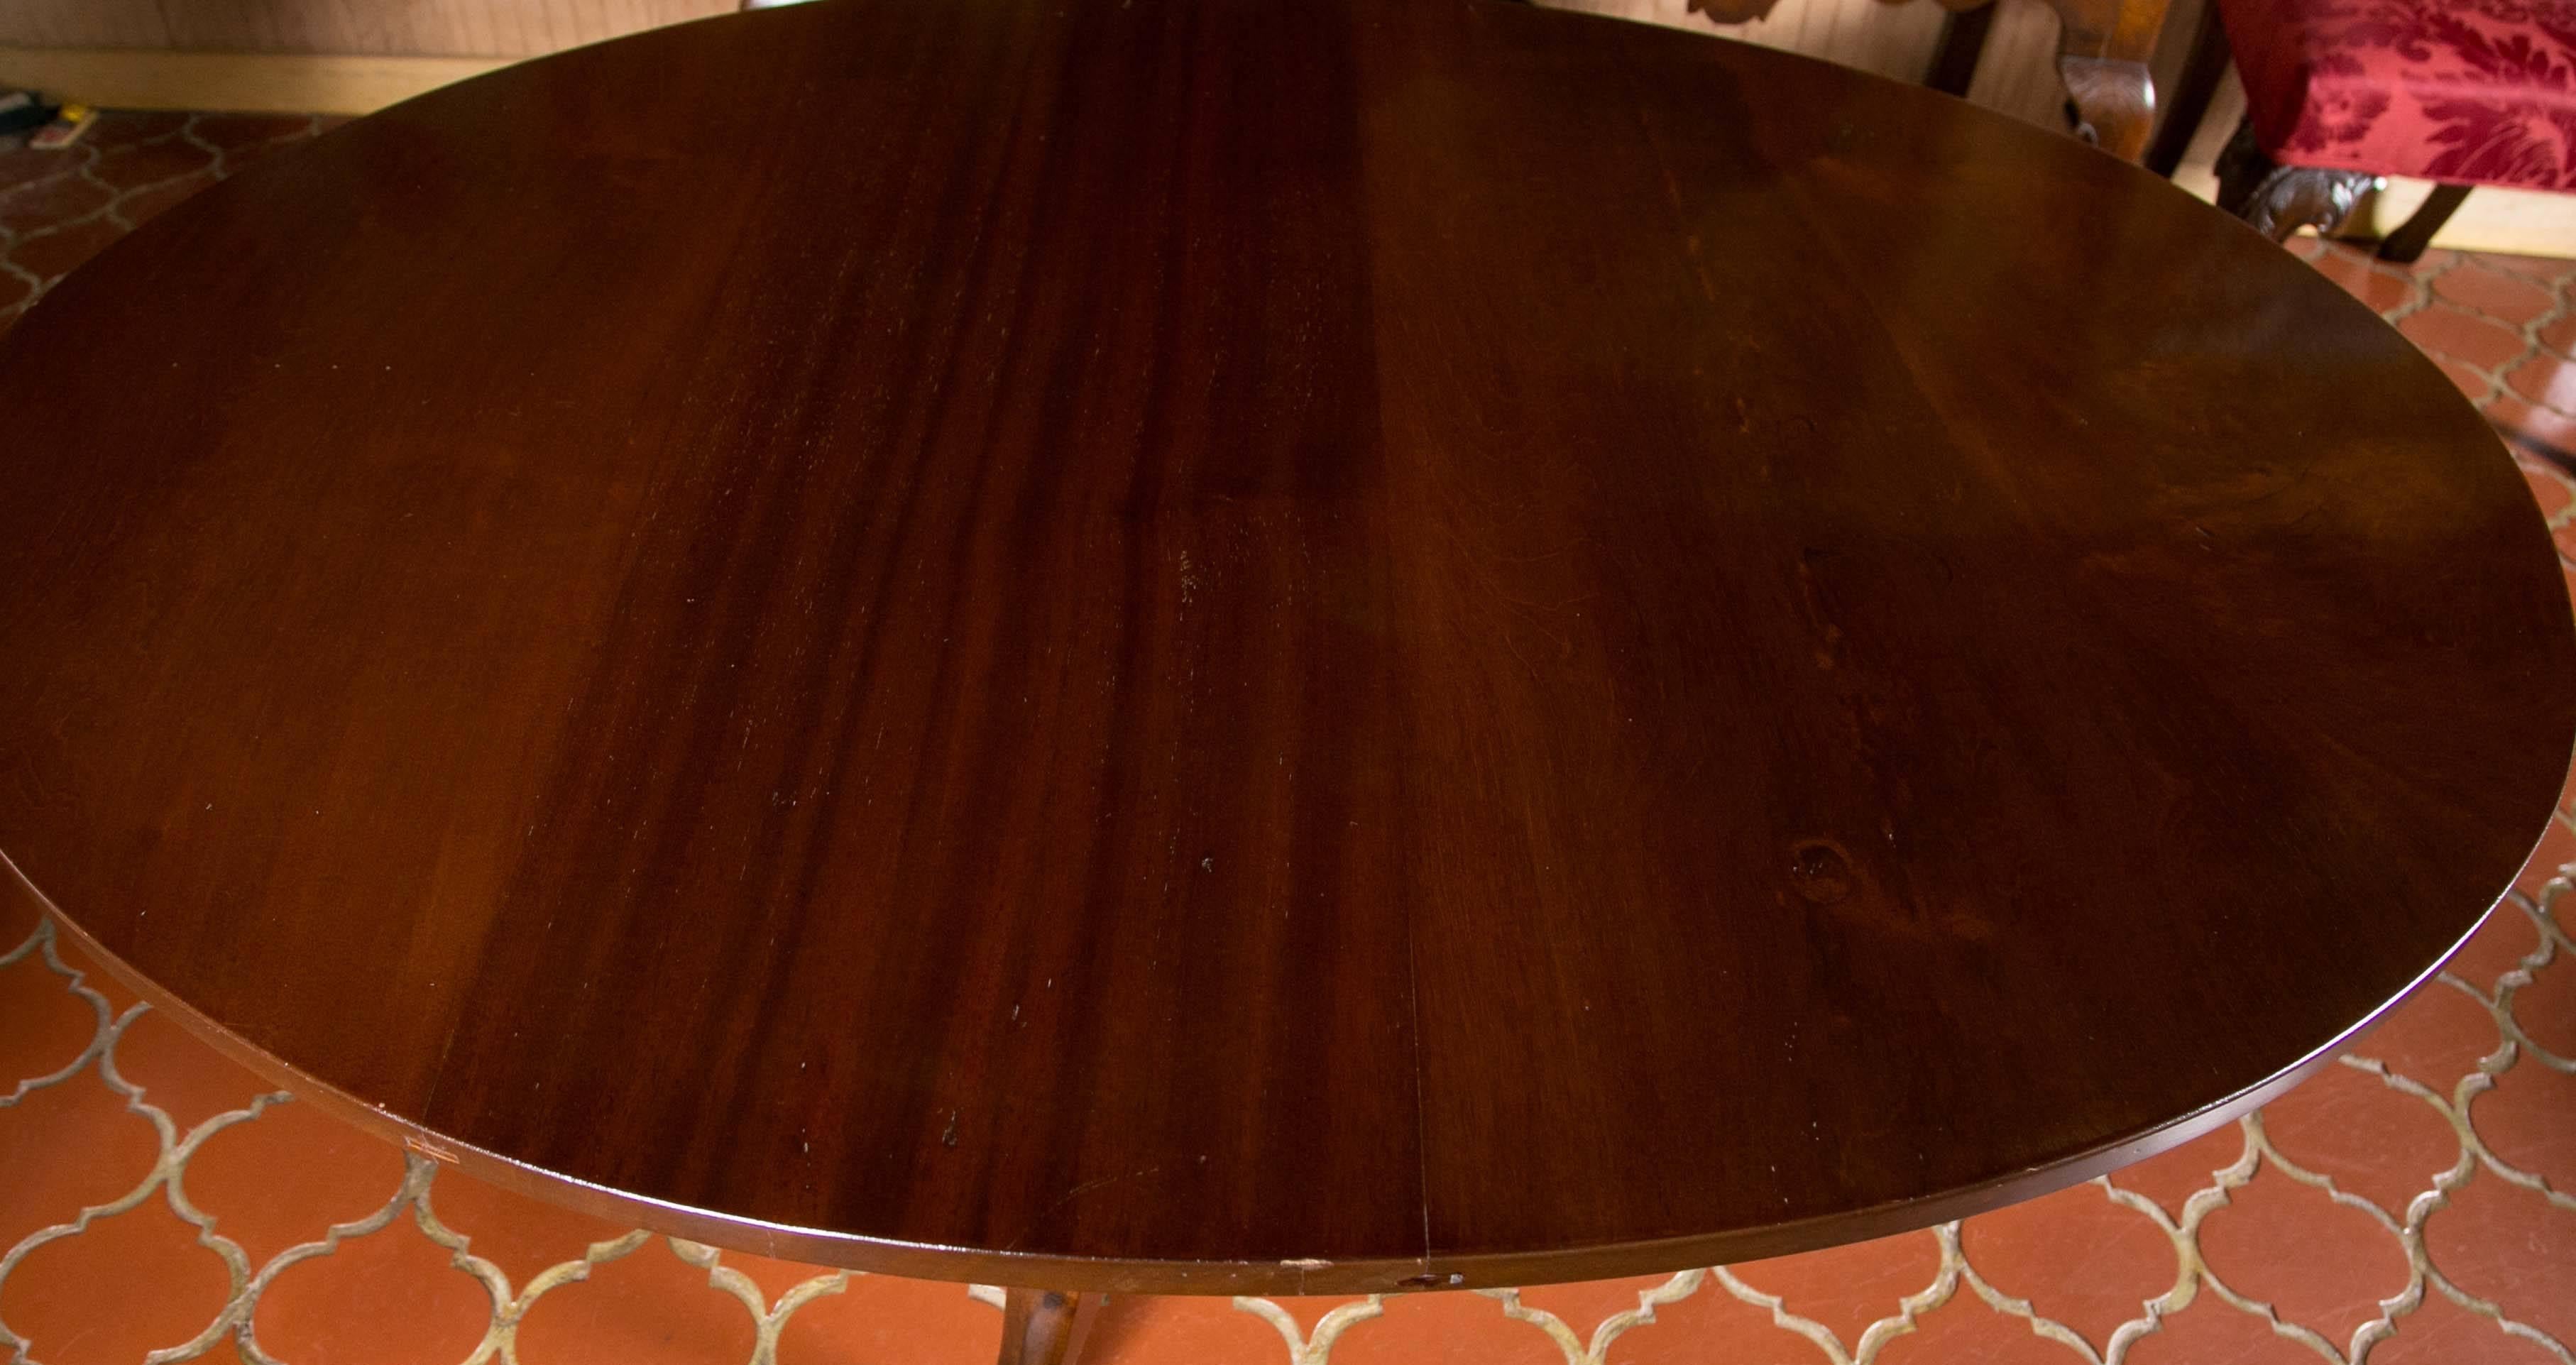 Unusual oval shape tilt-top table. Solid mahogany top with sturdy tripod base. Seats four to six. Perfect for those rooms demanding unique solutions.